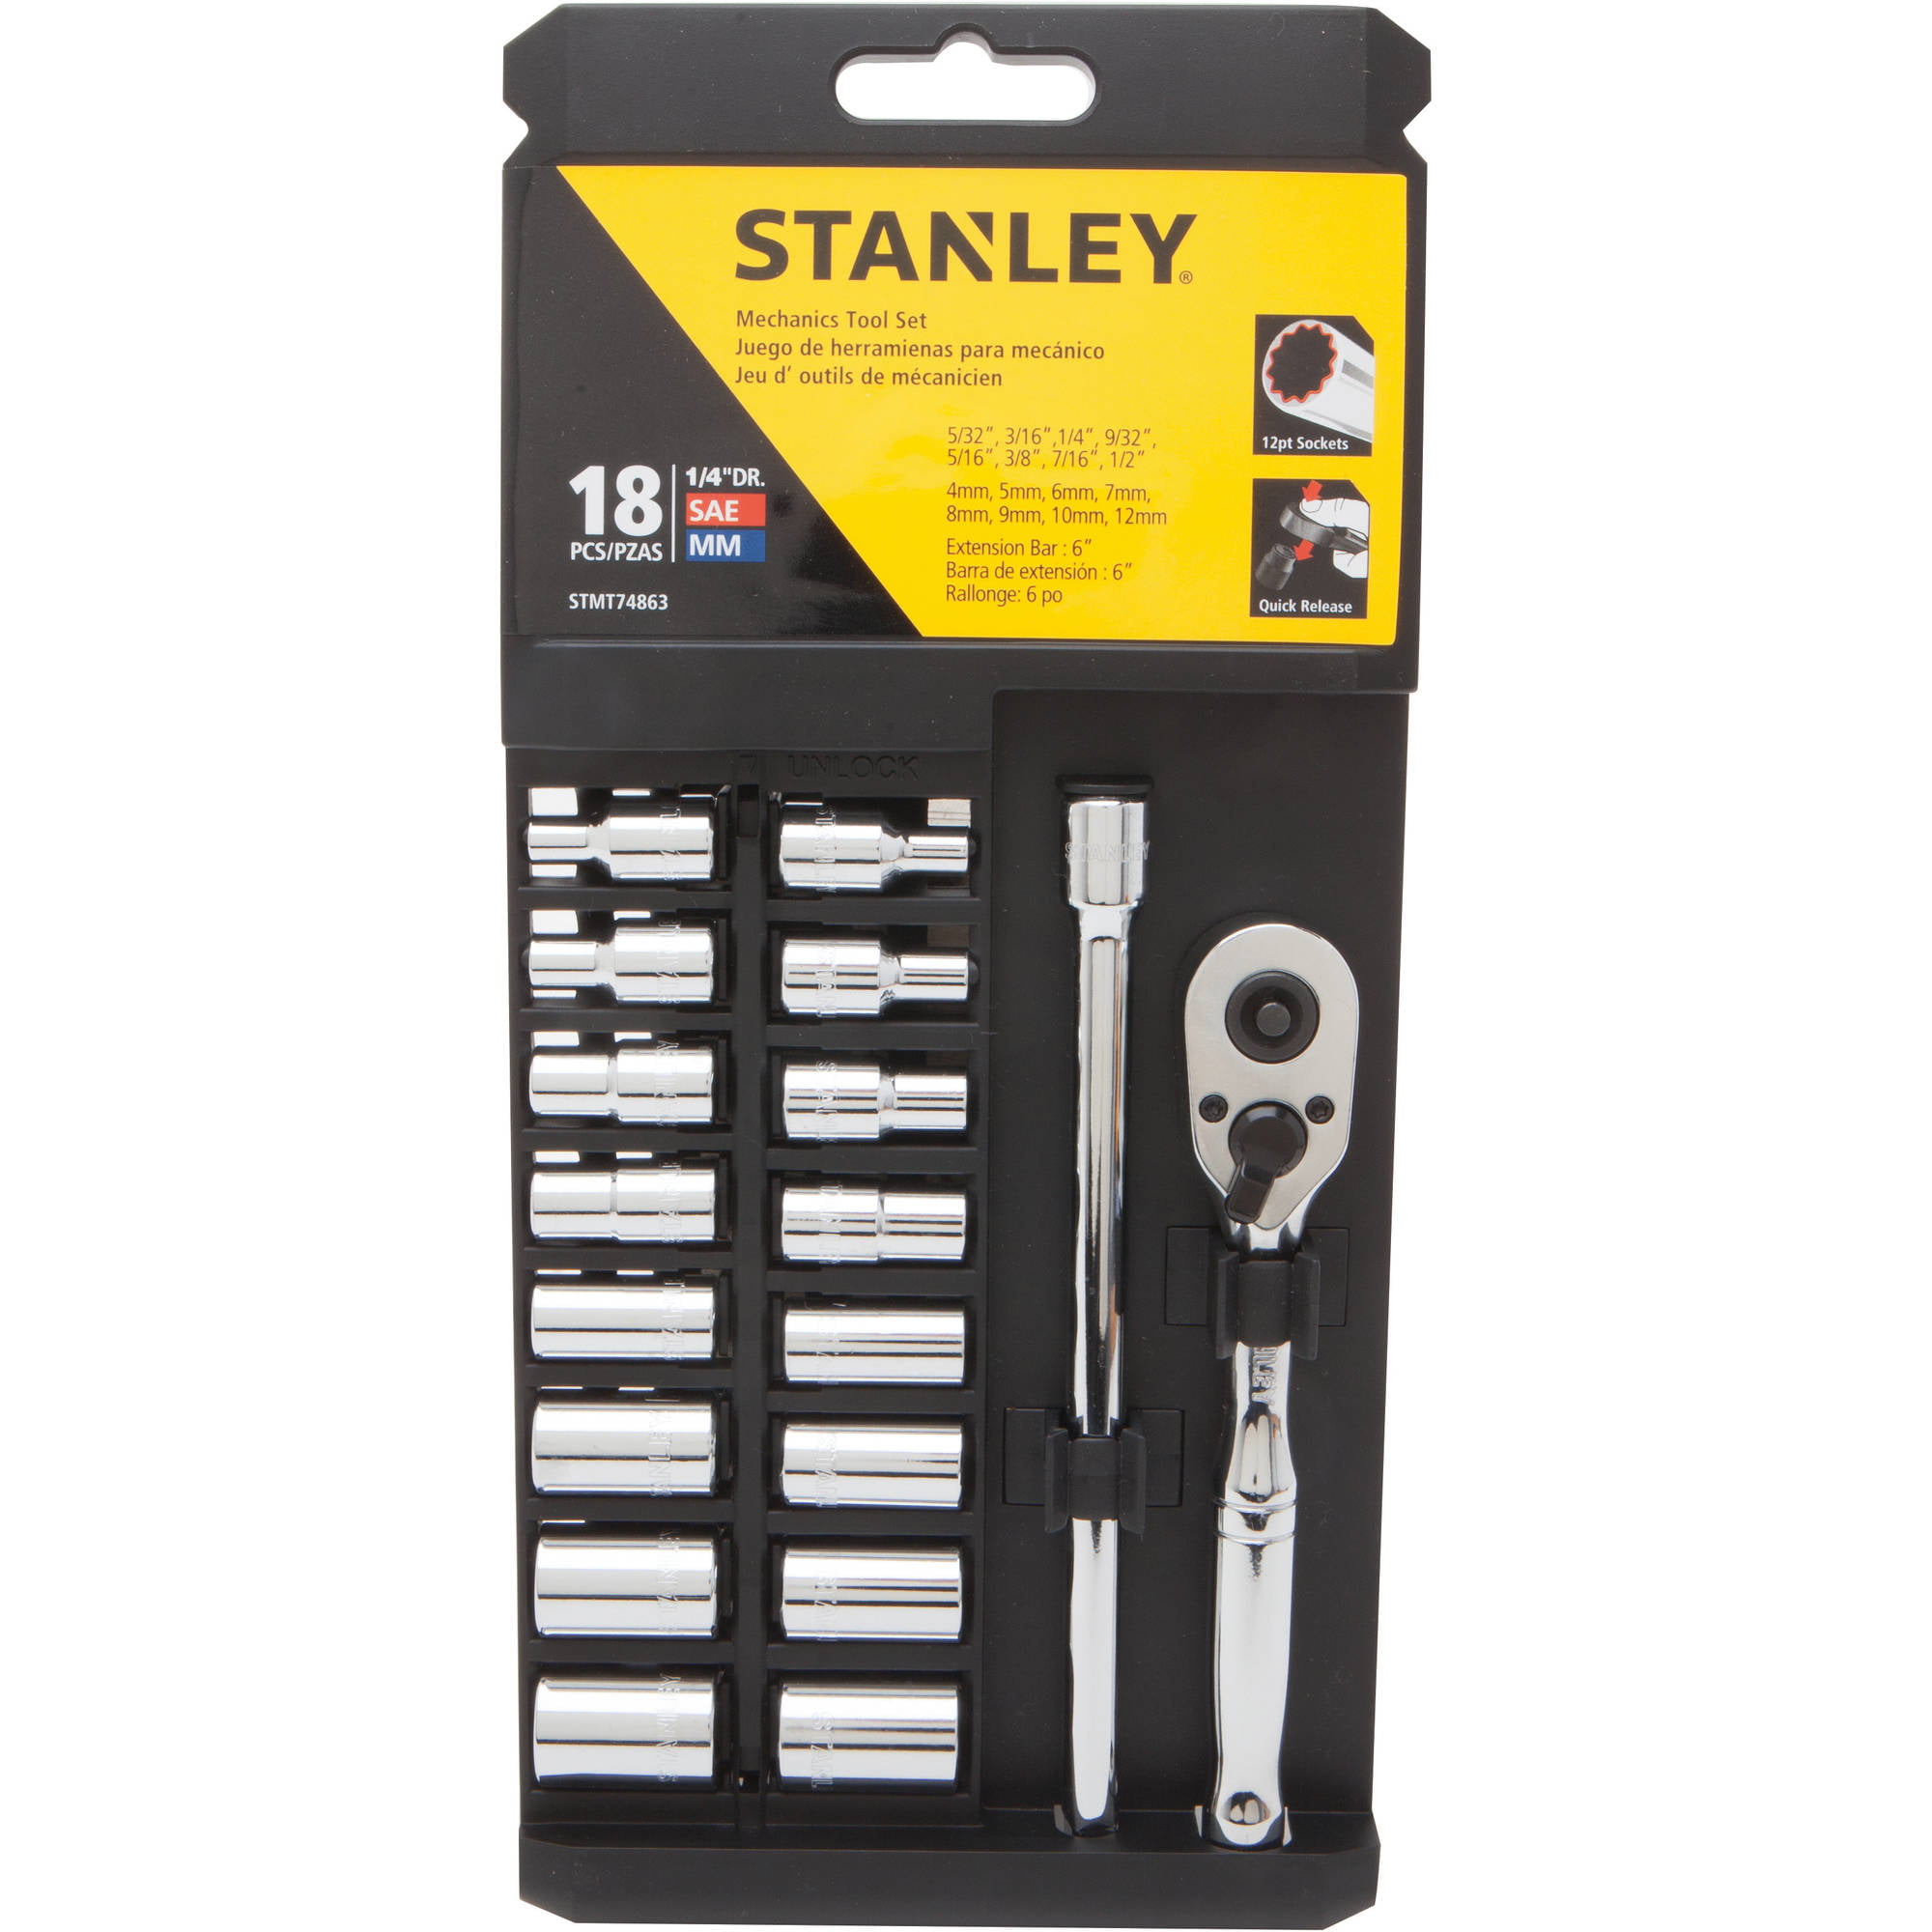 Stanley Mate System Review🧉🤔 For the price, I wouldn't recommend